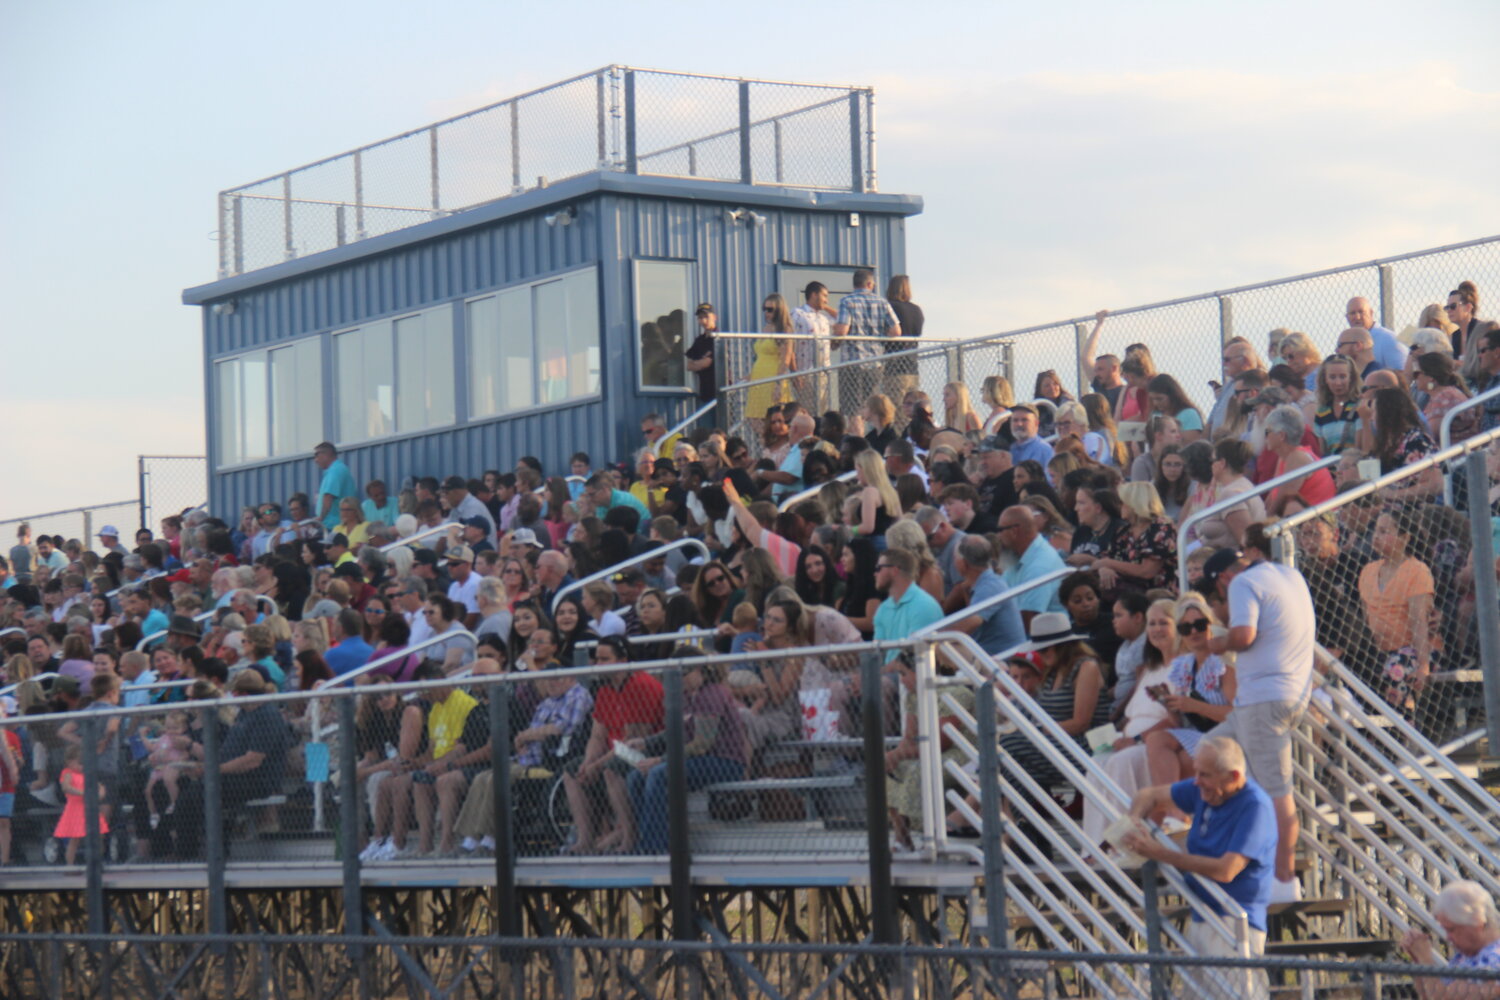 Seats were hard to come by in the bleachers at the Wright City High School football stadium on June 2.